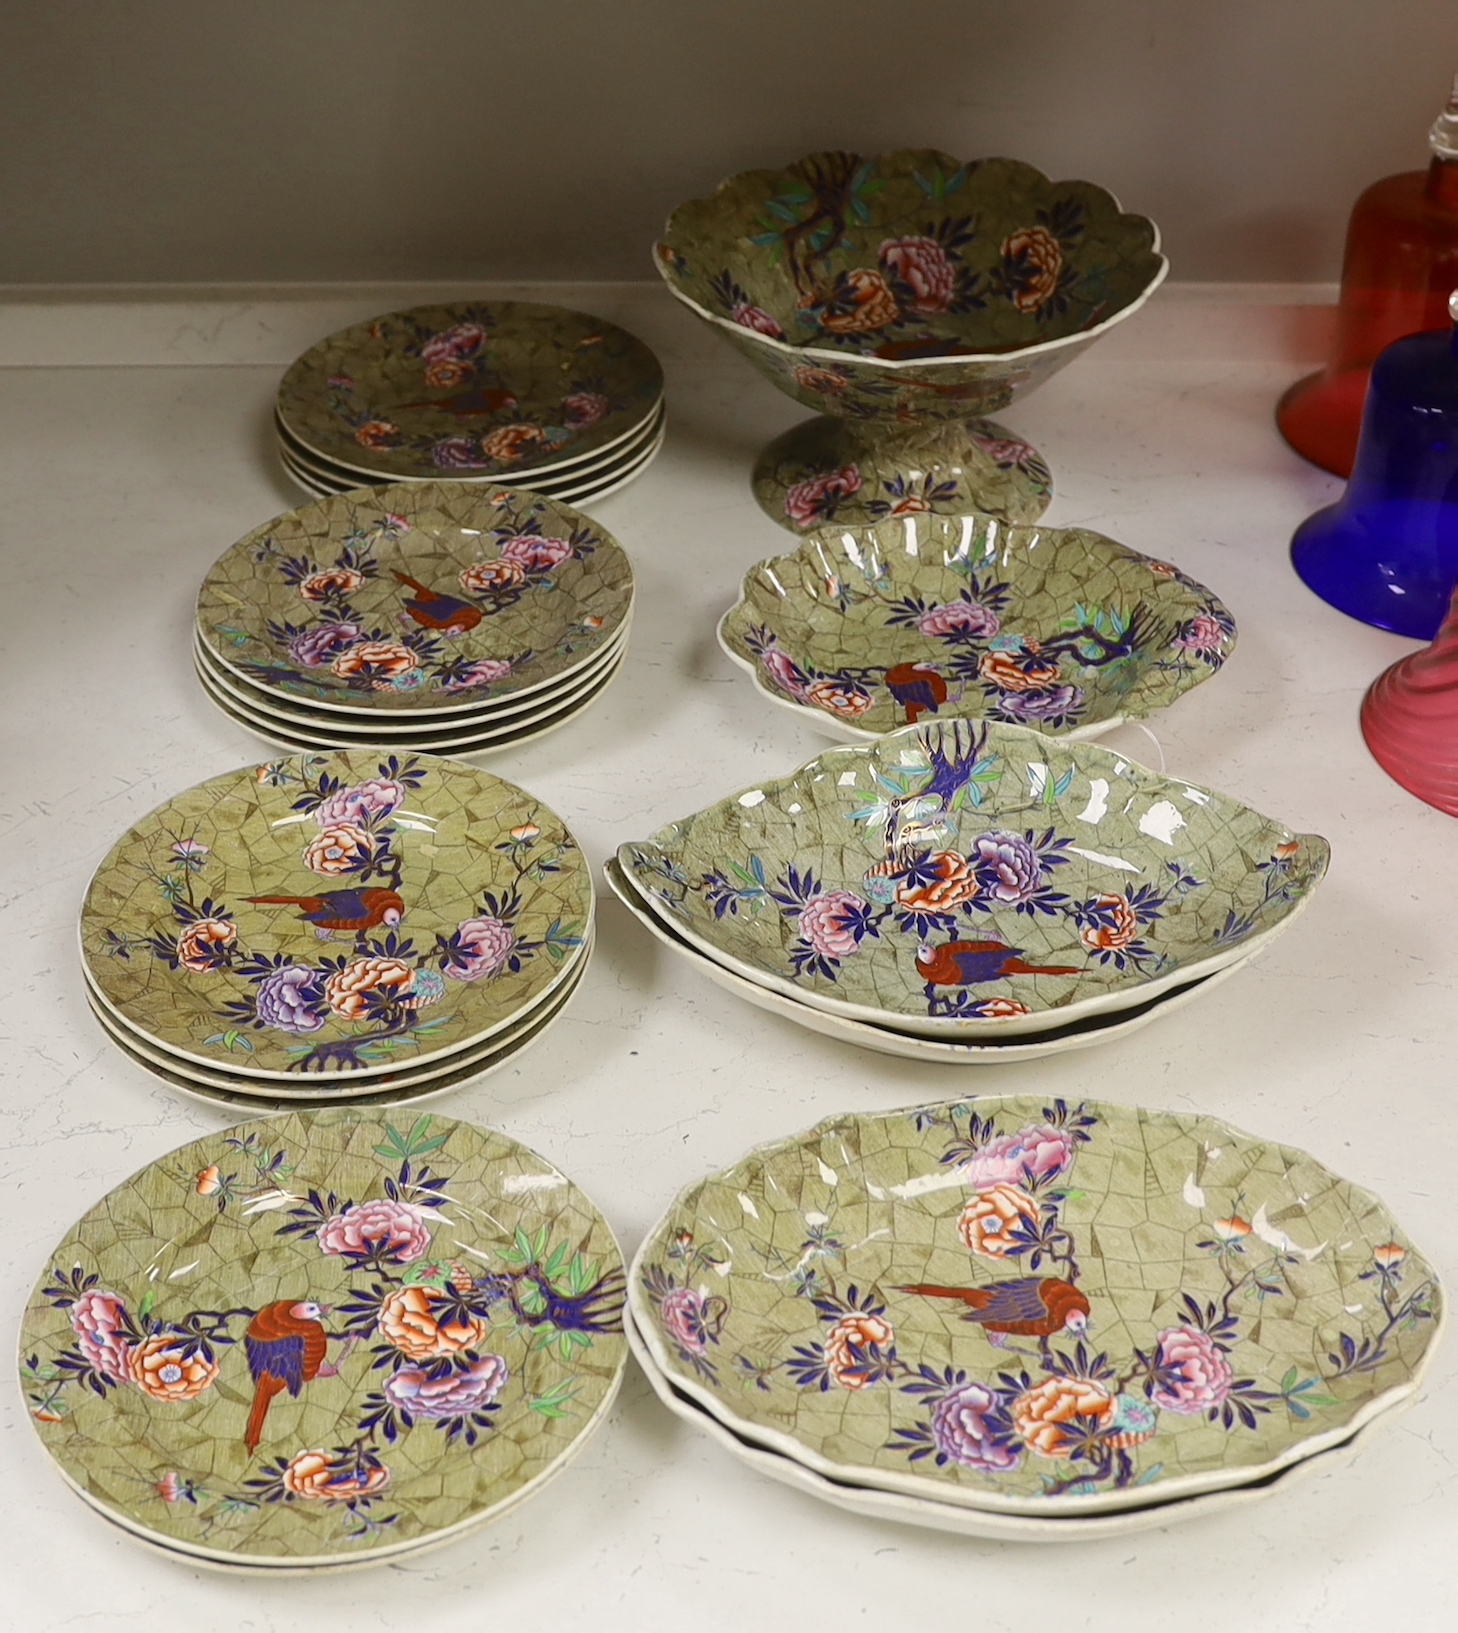 A Spode ‘Tumbledown Dick’ part dessert service, early 19th century, decorated with birds and flowers